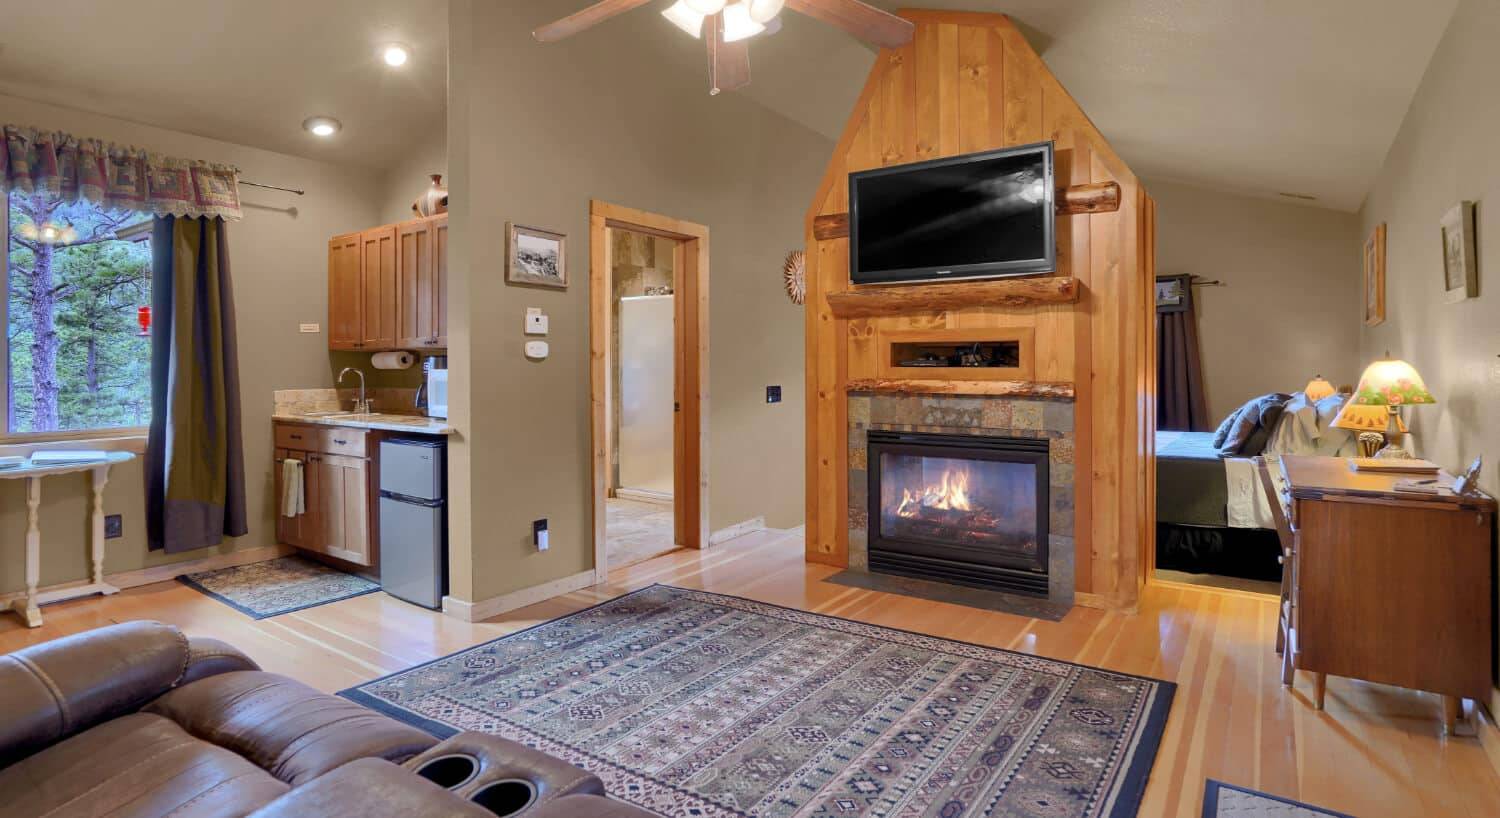 sitting room with fireplace, large flat screen tv, a bed in a back room, and a small kitchenette